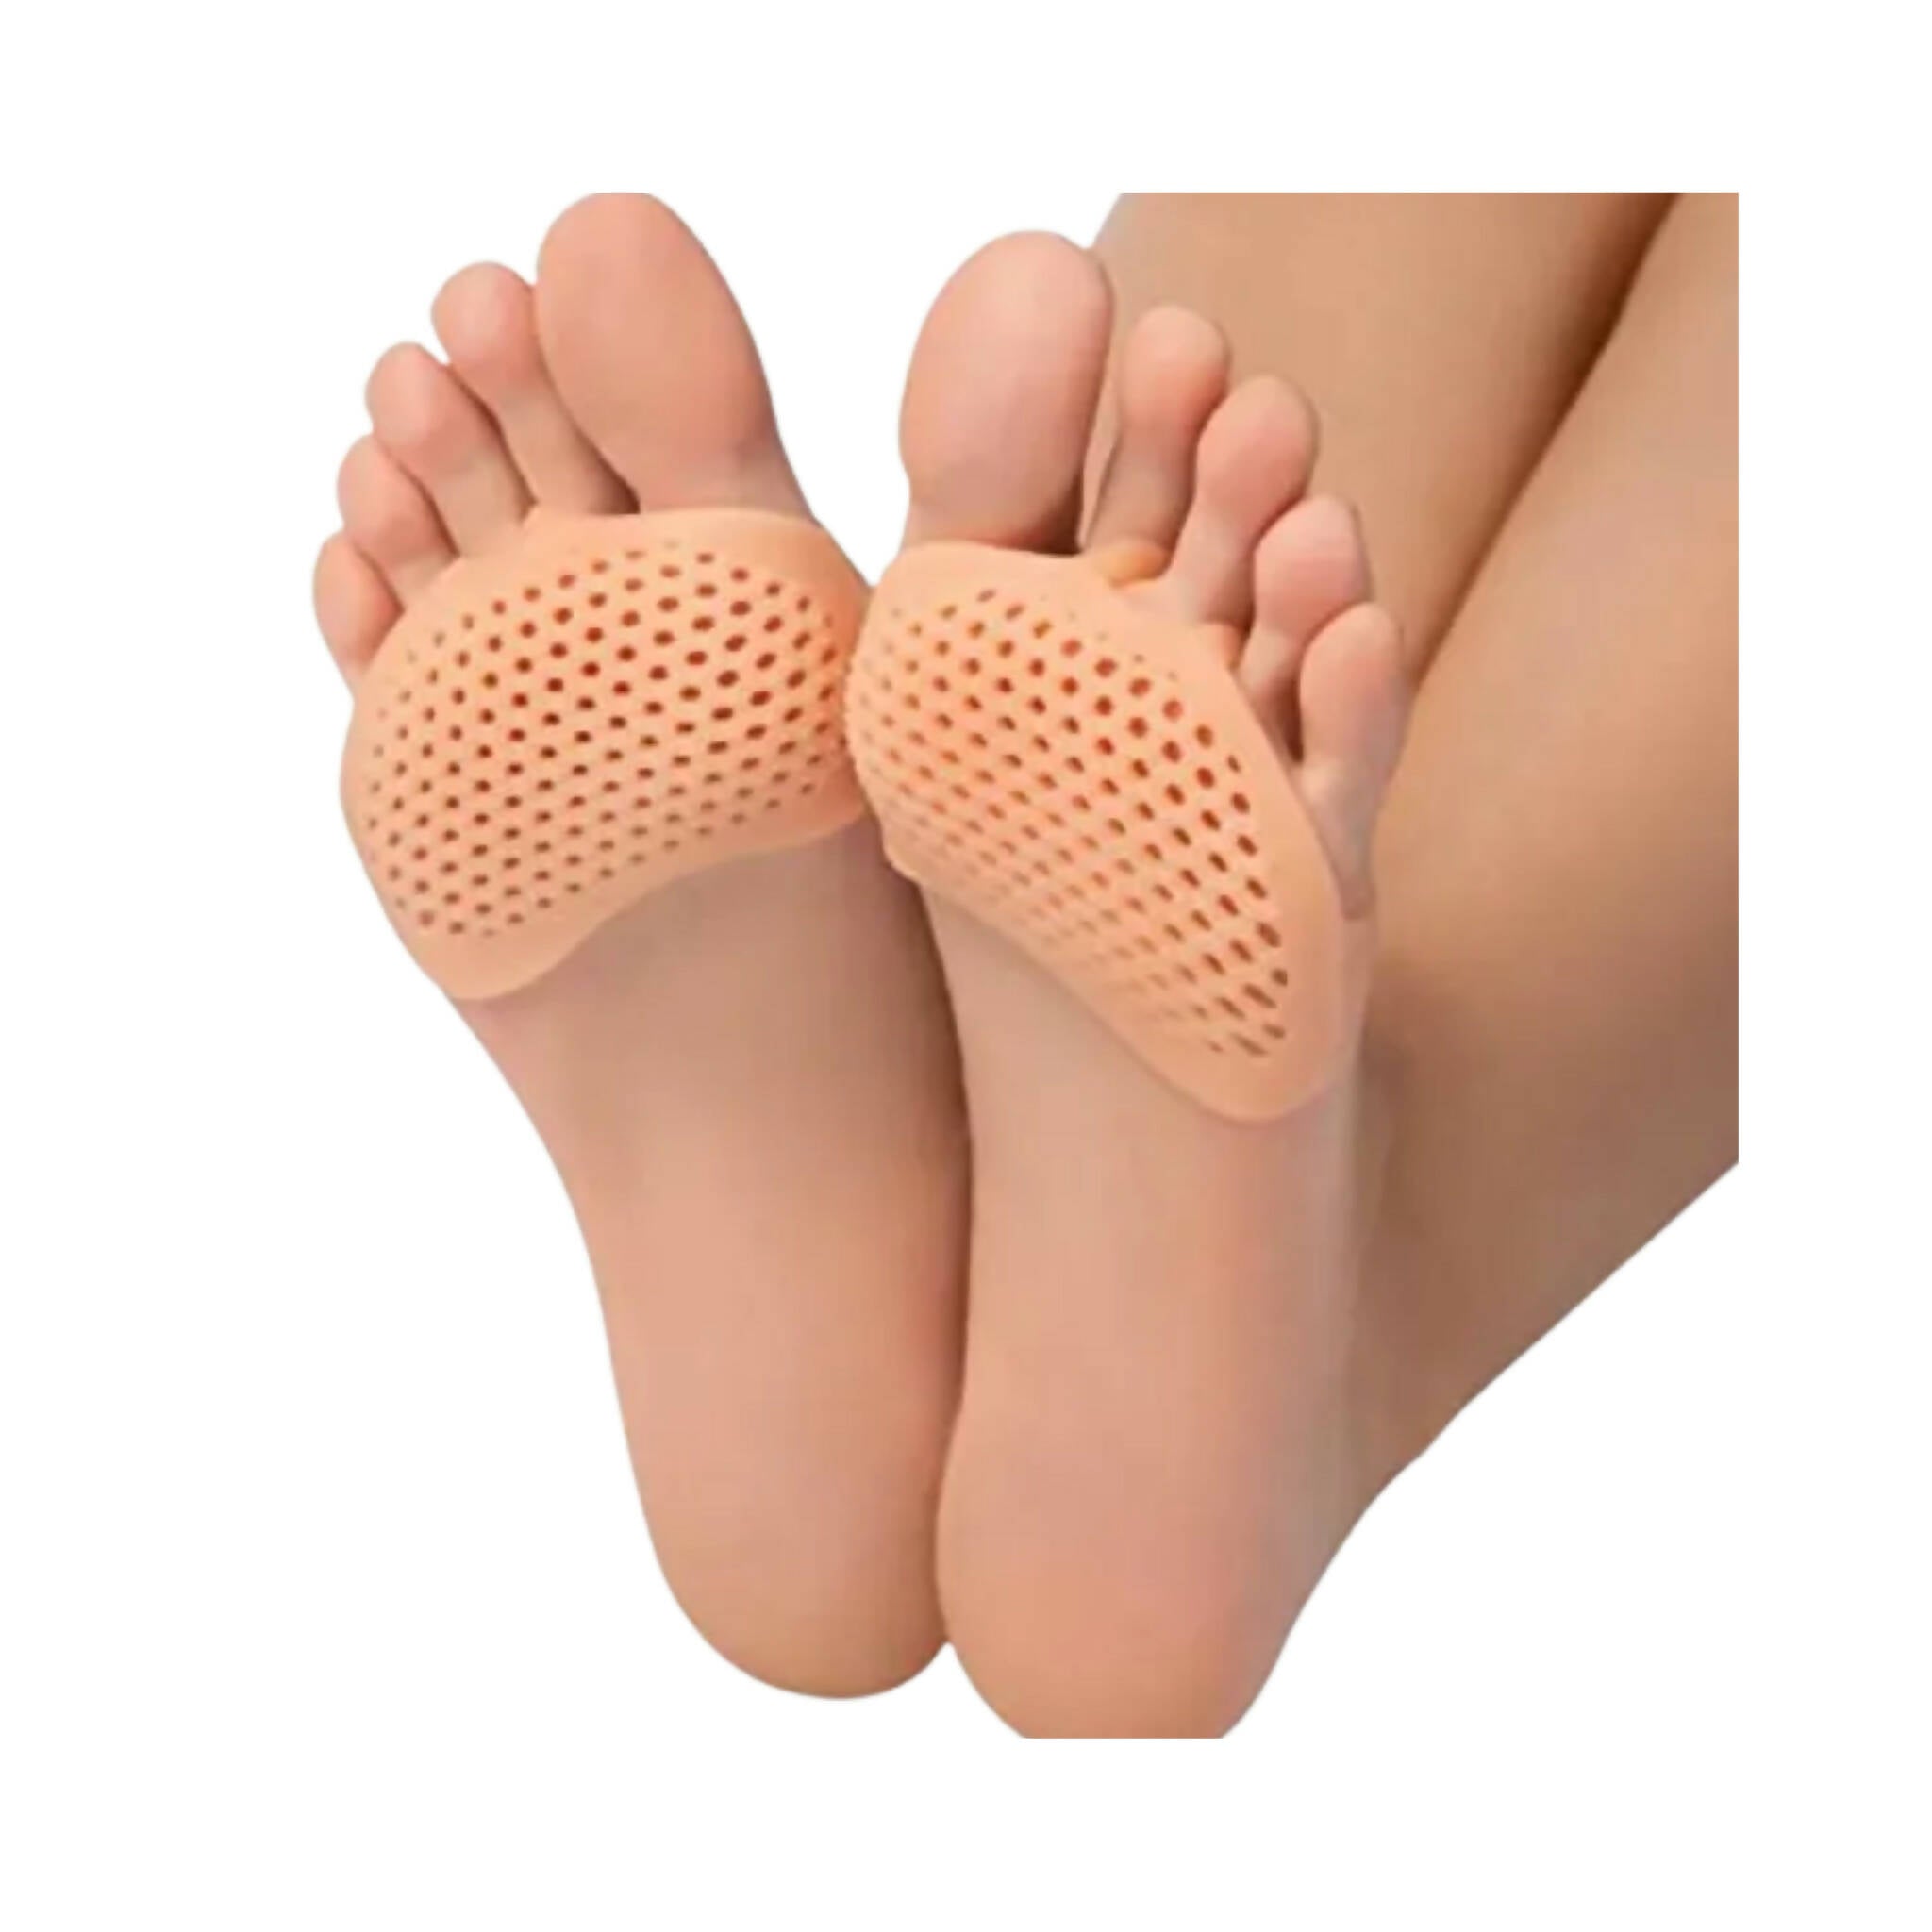 Silicone Heel Sock, Super Soft Shoes With Toe Tip Protection Ballet, for Unisex